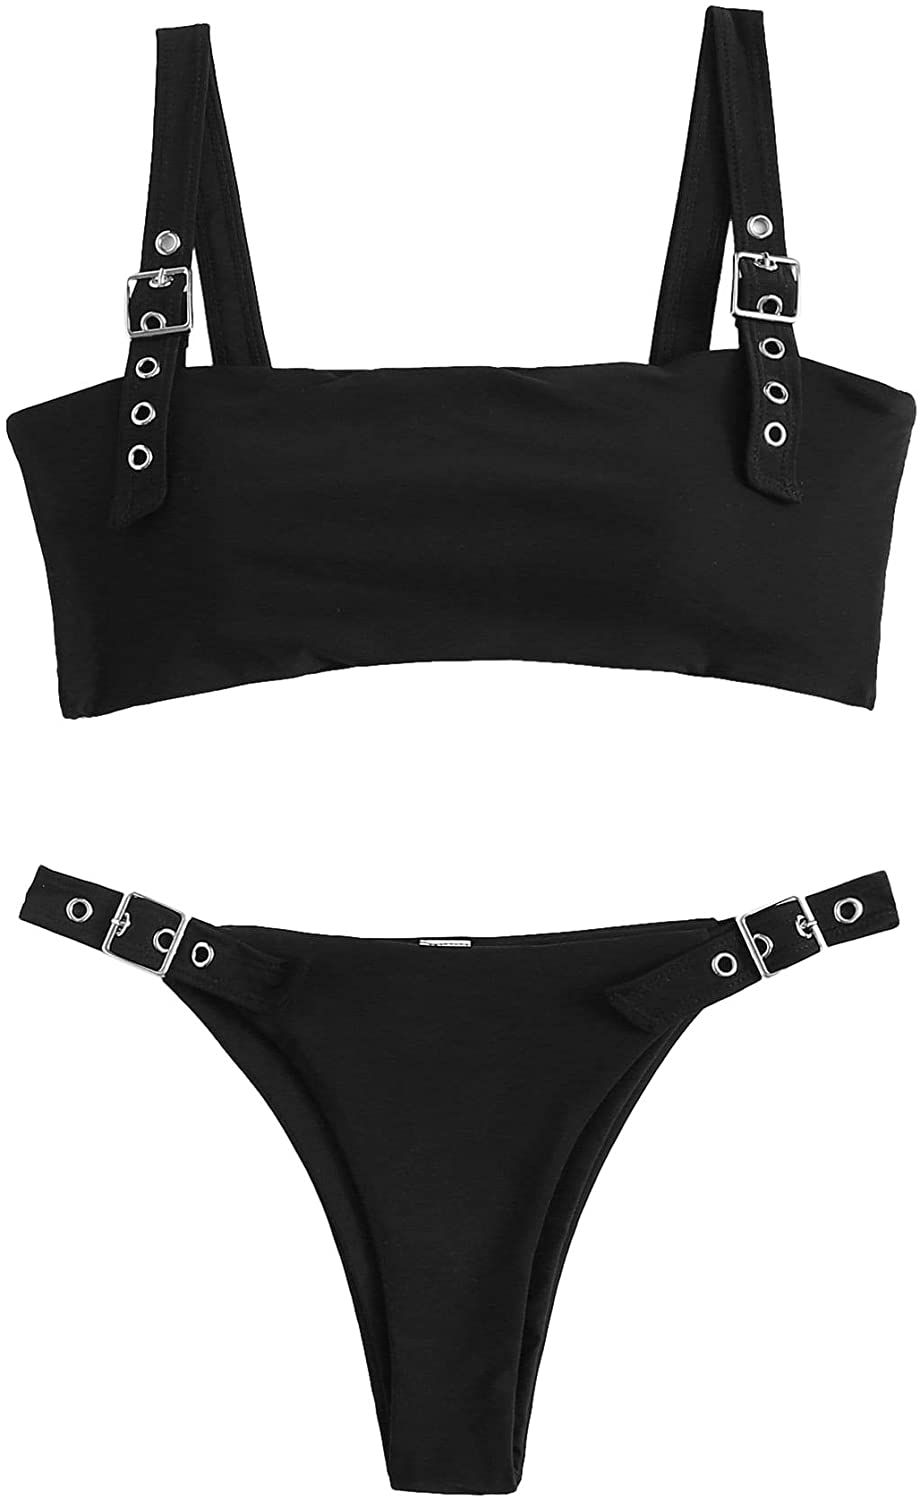 I Guess Thong Bikinis Are Becoming a Mainstream Trend – Outlet119